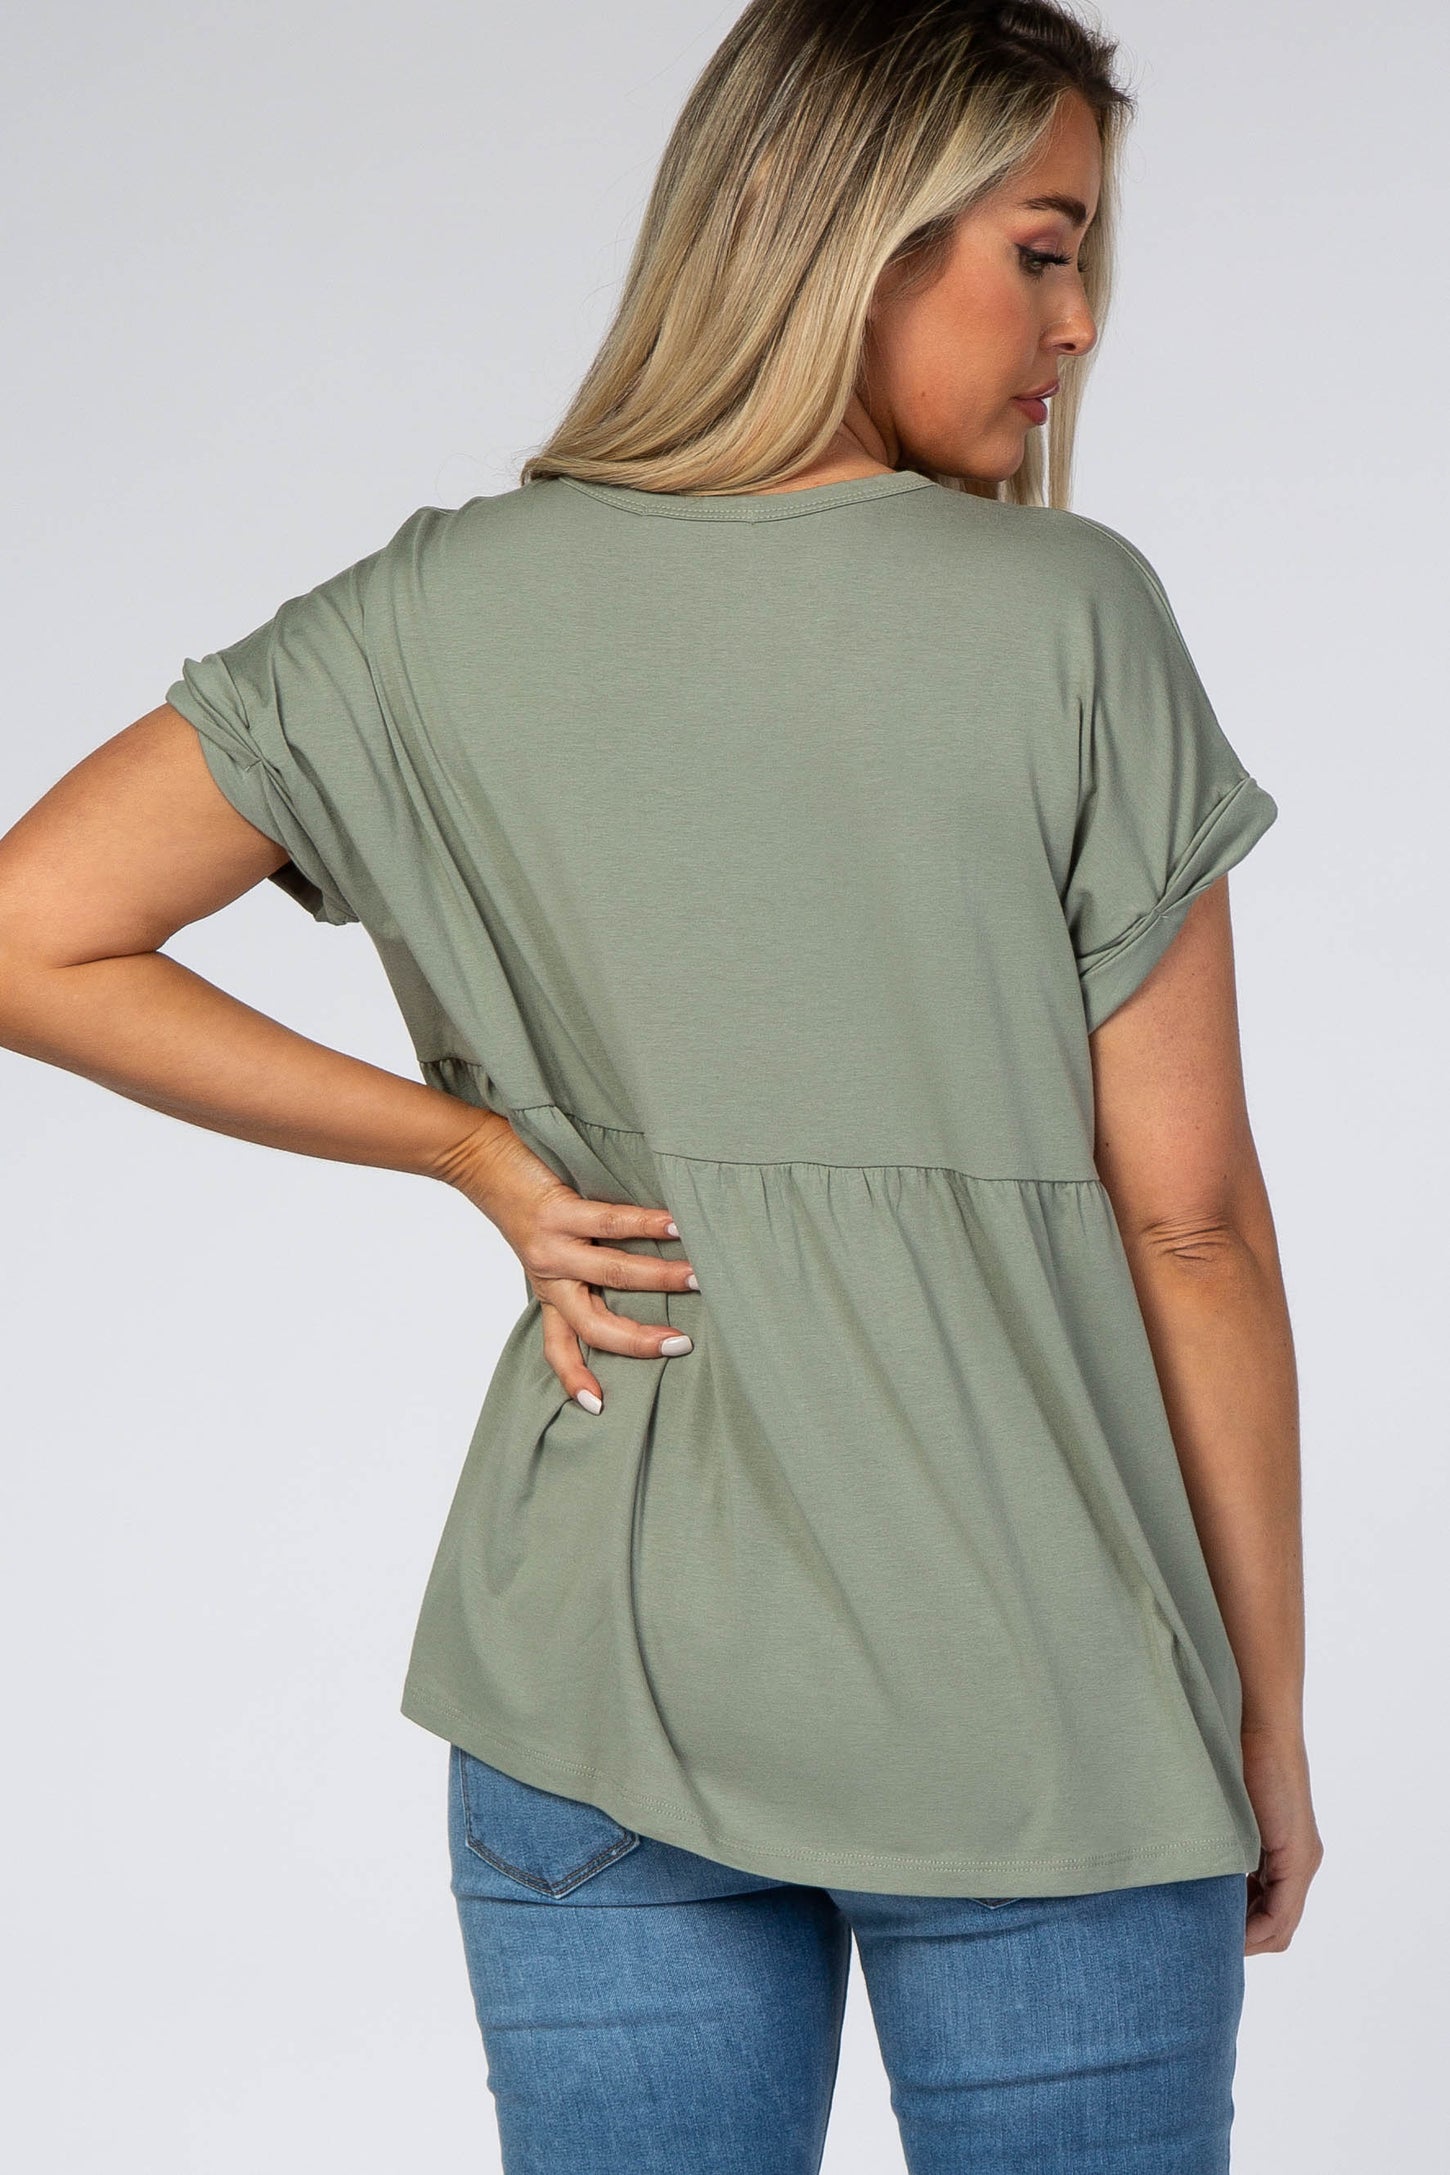 Olive Boxy Button Front Short Sleeve Maternity Top